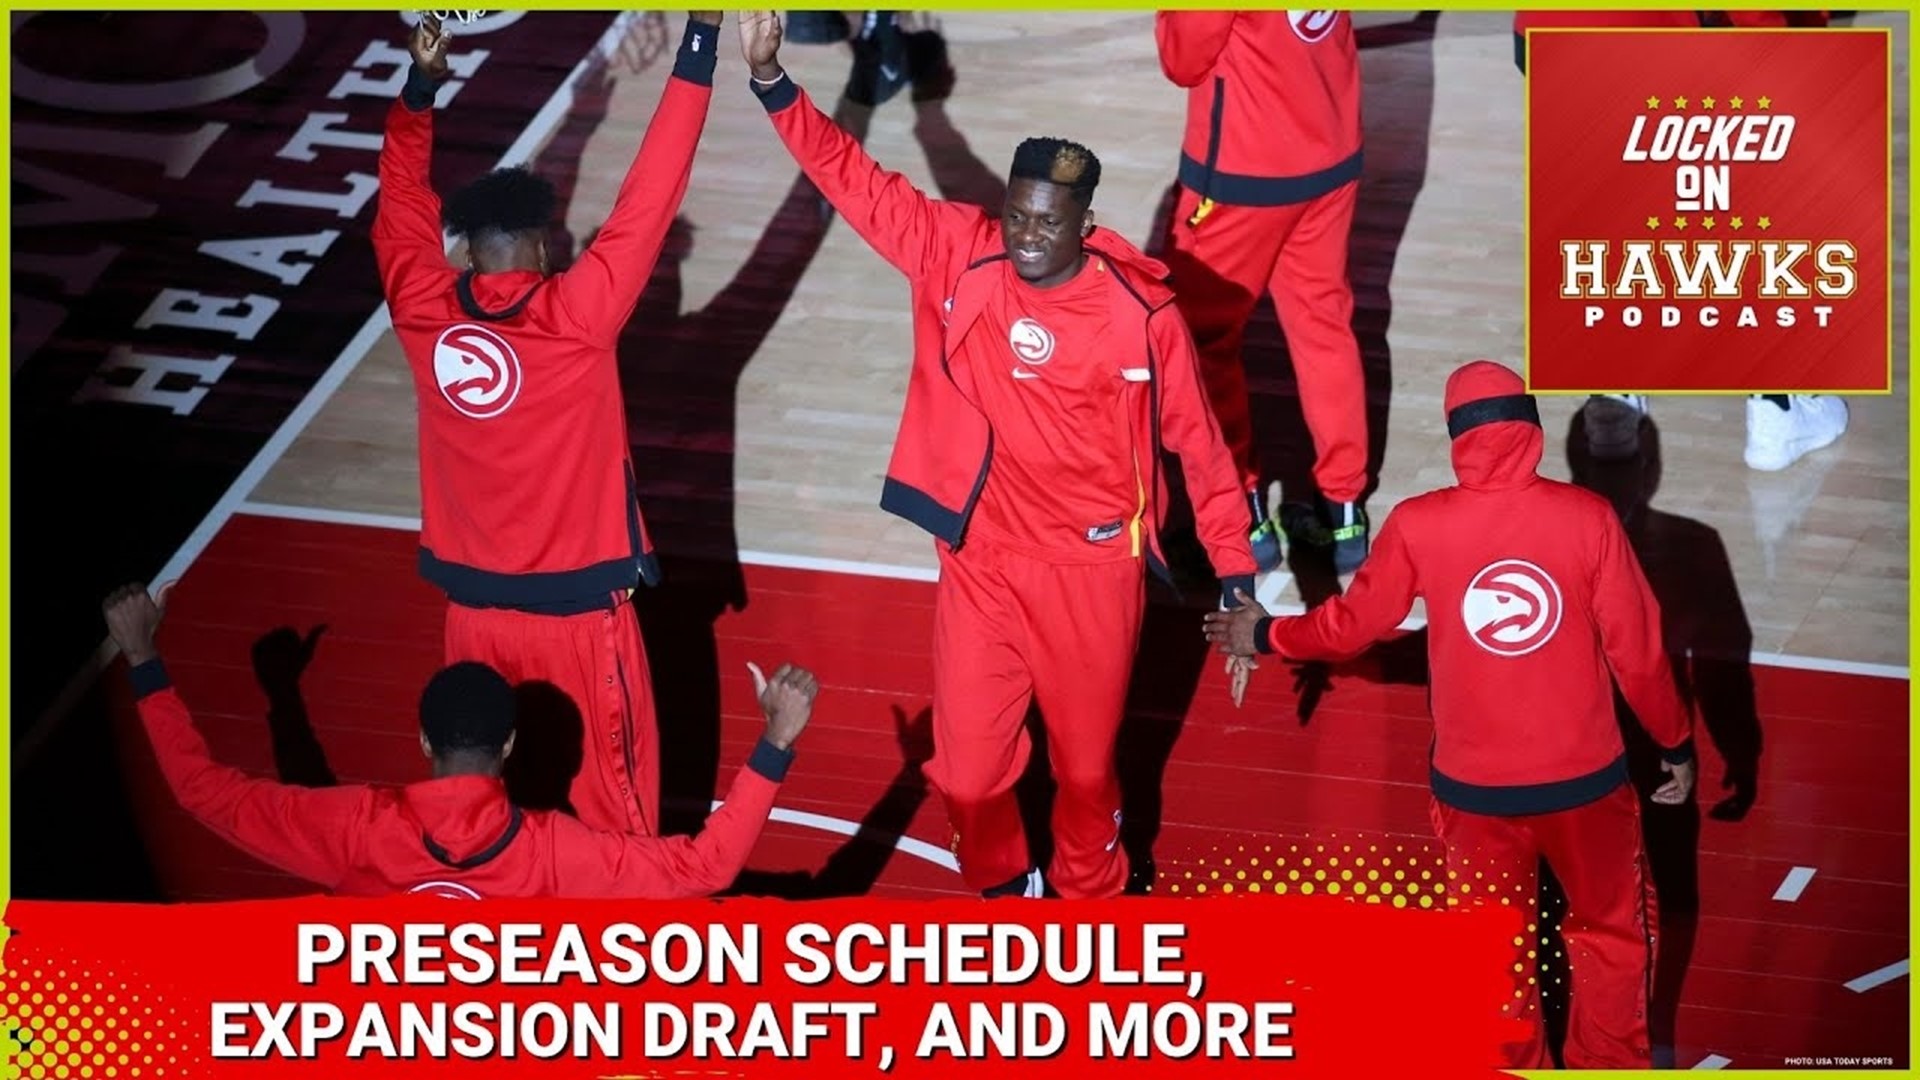 The show focuses on the preseason schedule for the Atlanta Hawks, a new hire in the organization, a hypothetical NBA expansion draft and some playoff betting odds